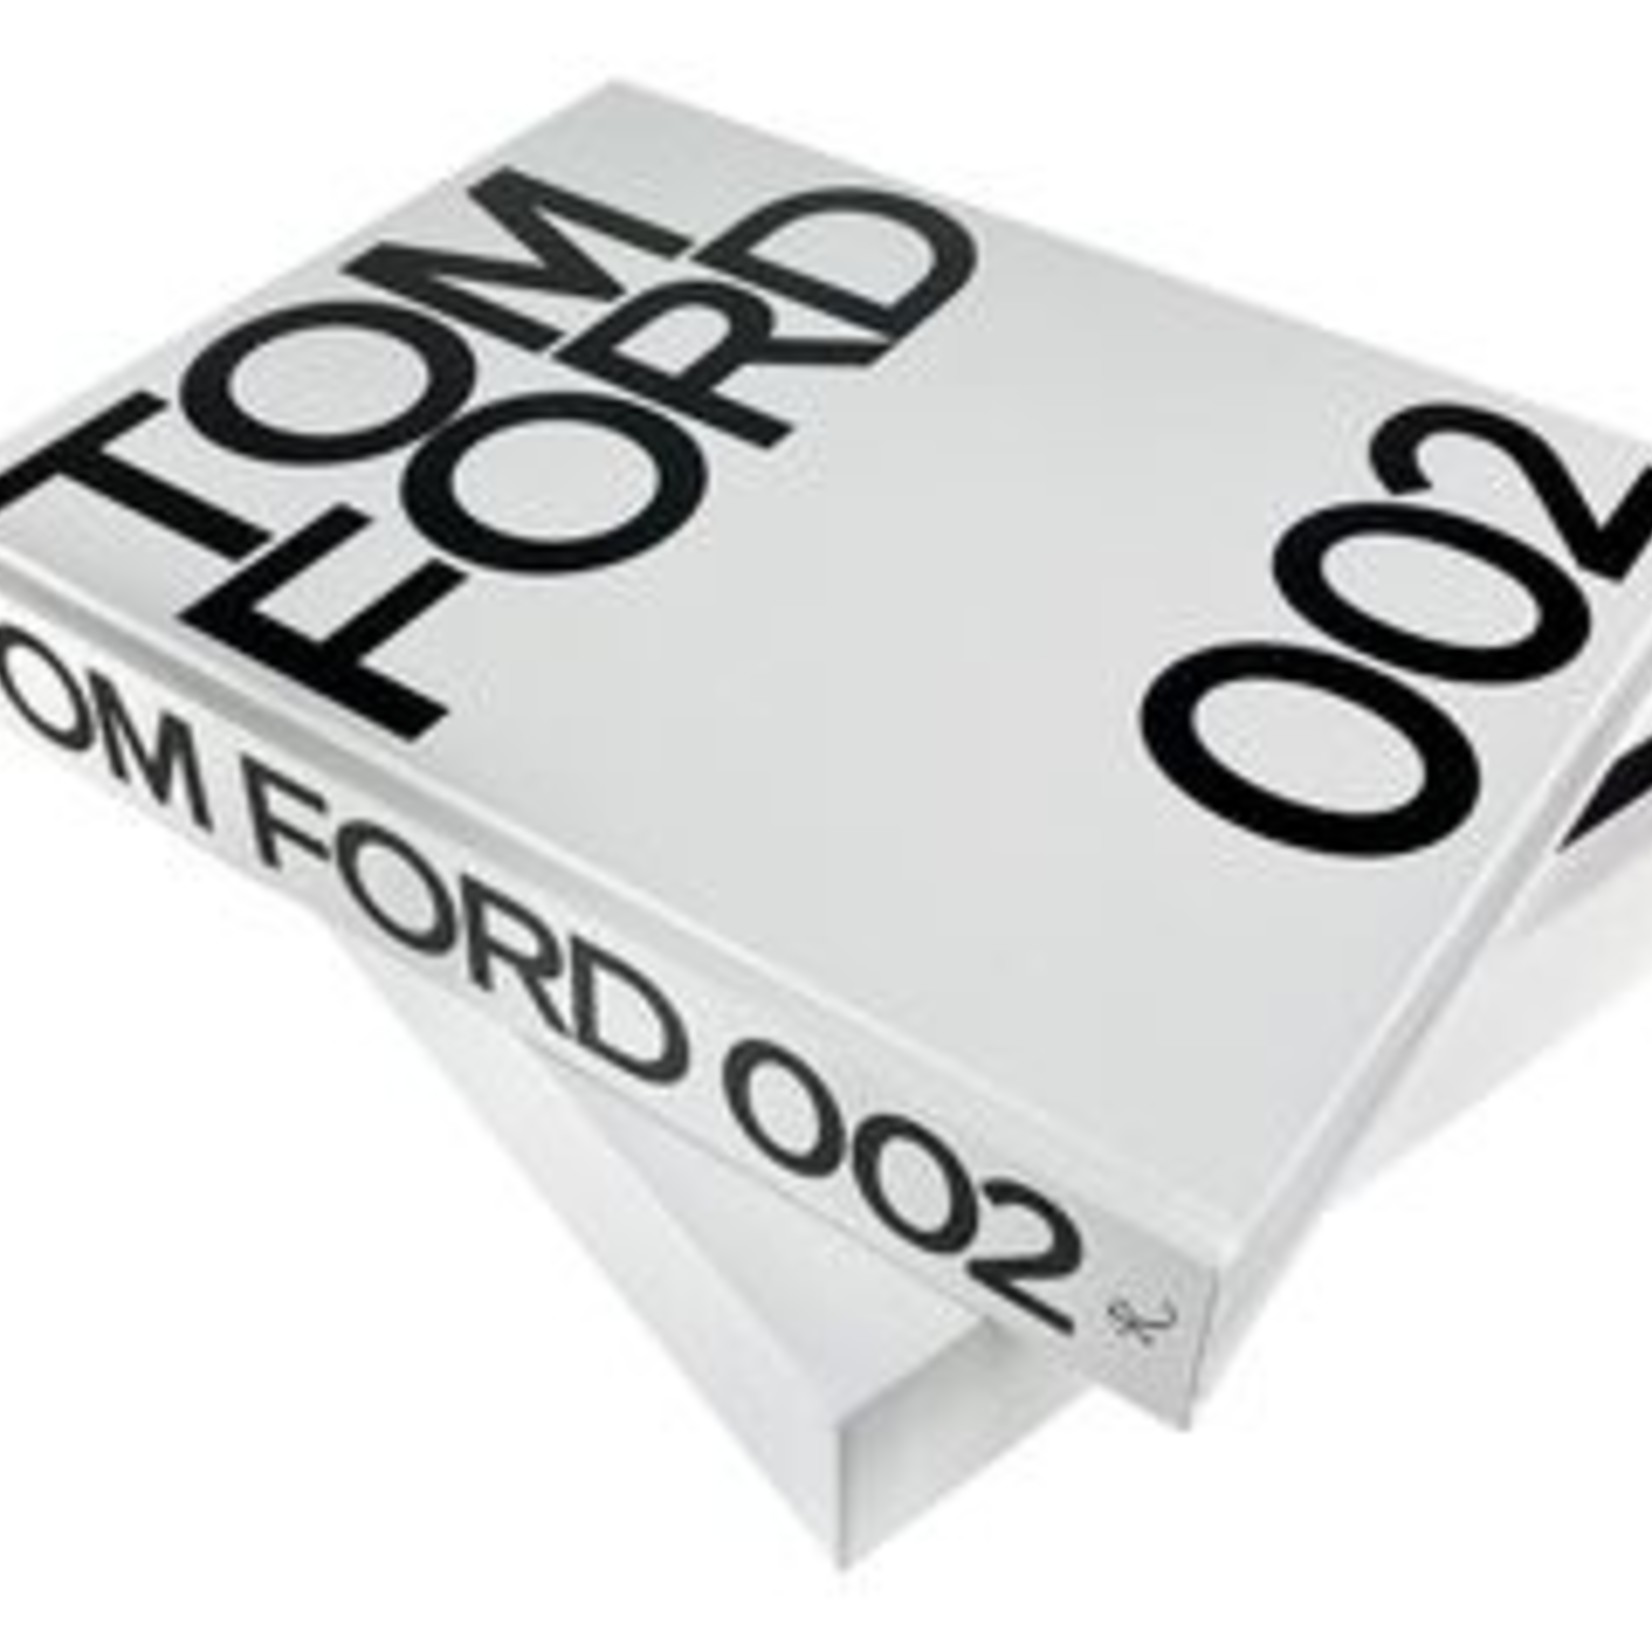 Common Ground Tom Ford 002